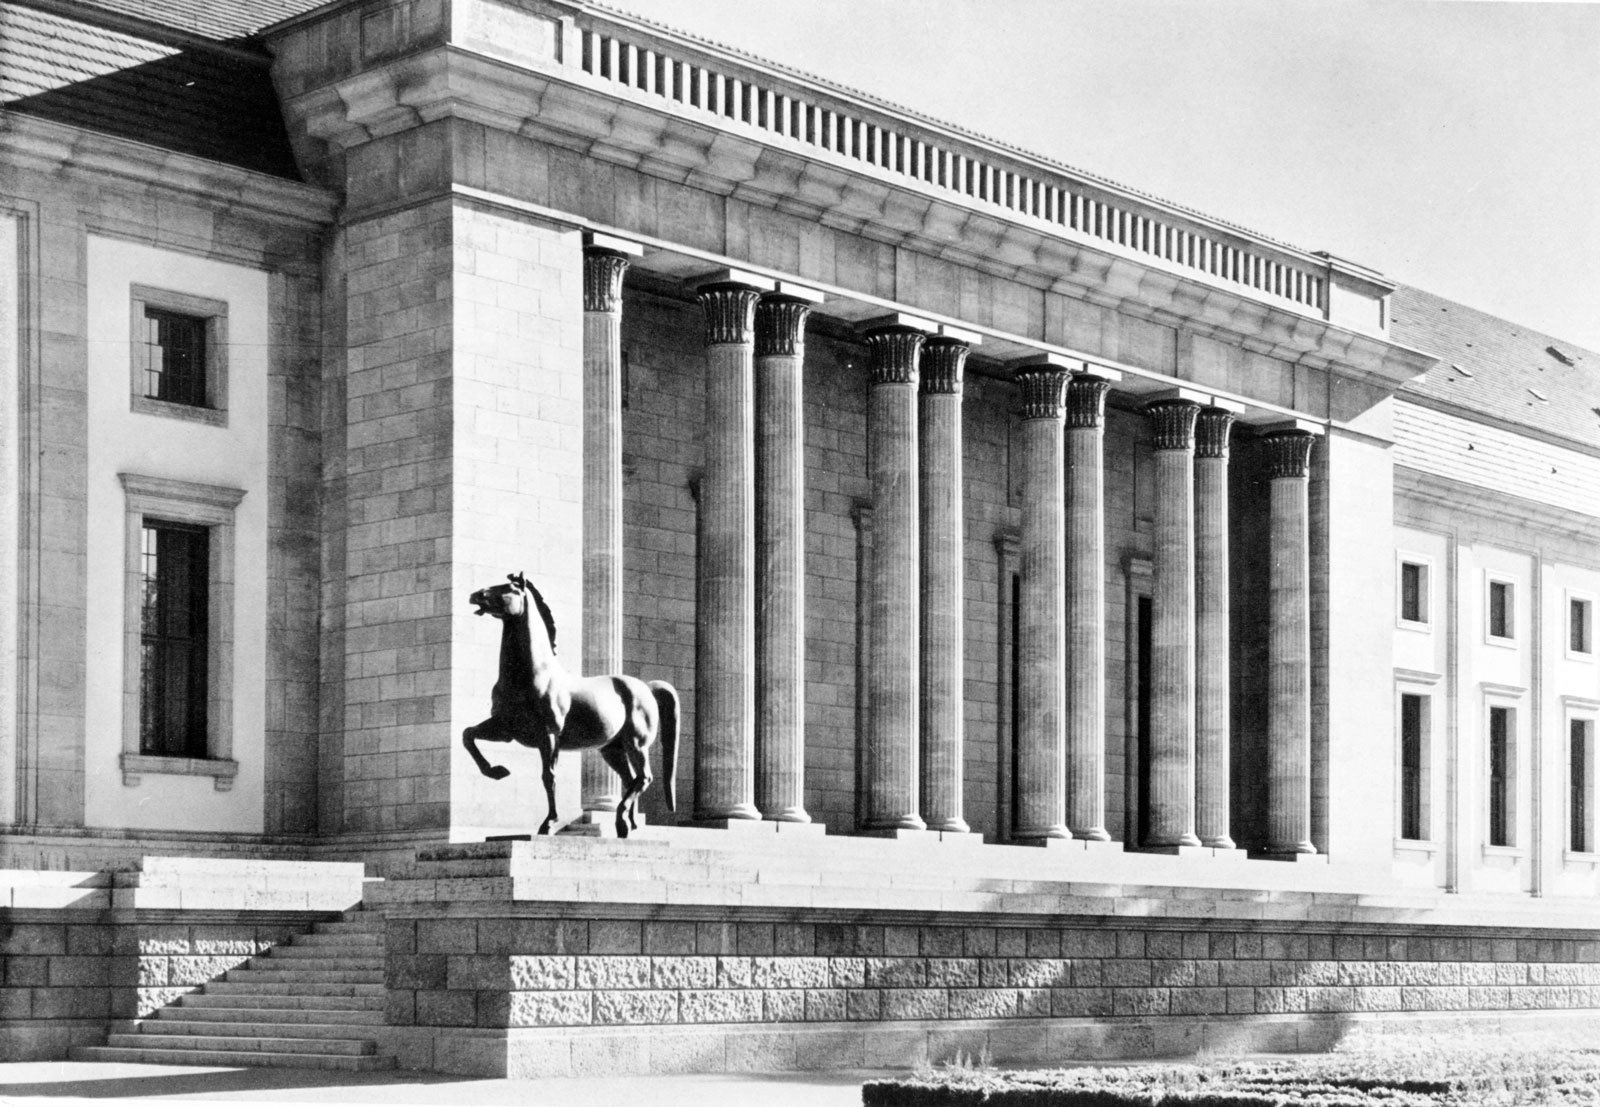 Albert Speer. Building of the New Reich Chancellory in Berlin. Park facade, 1938